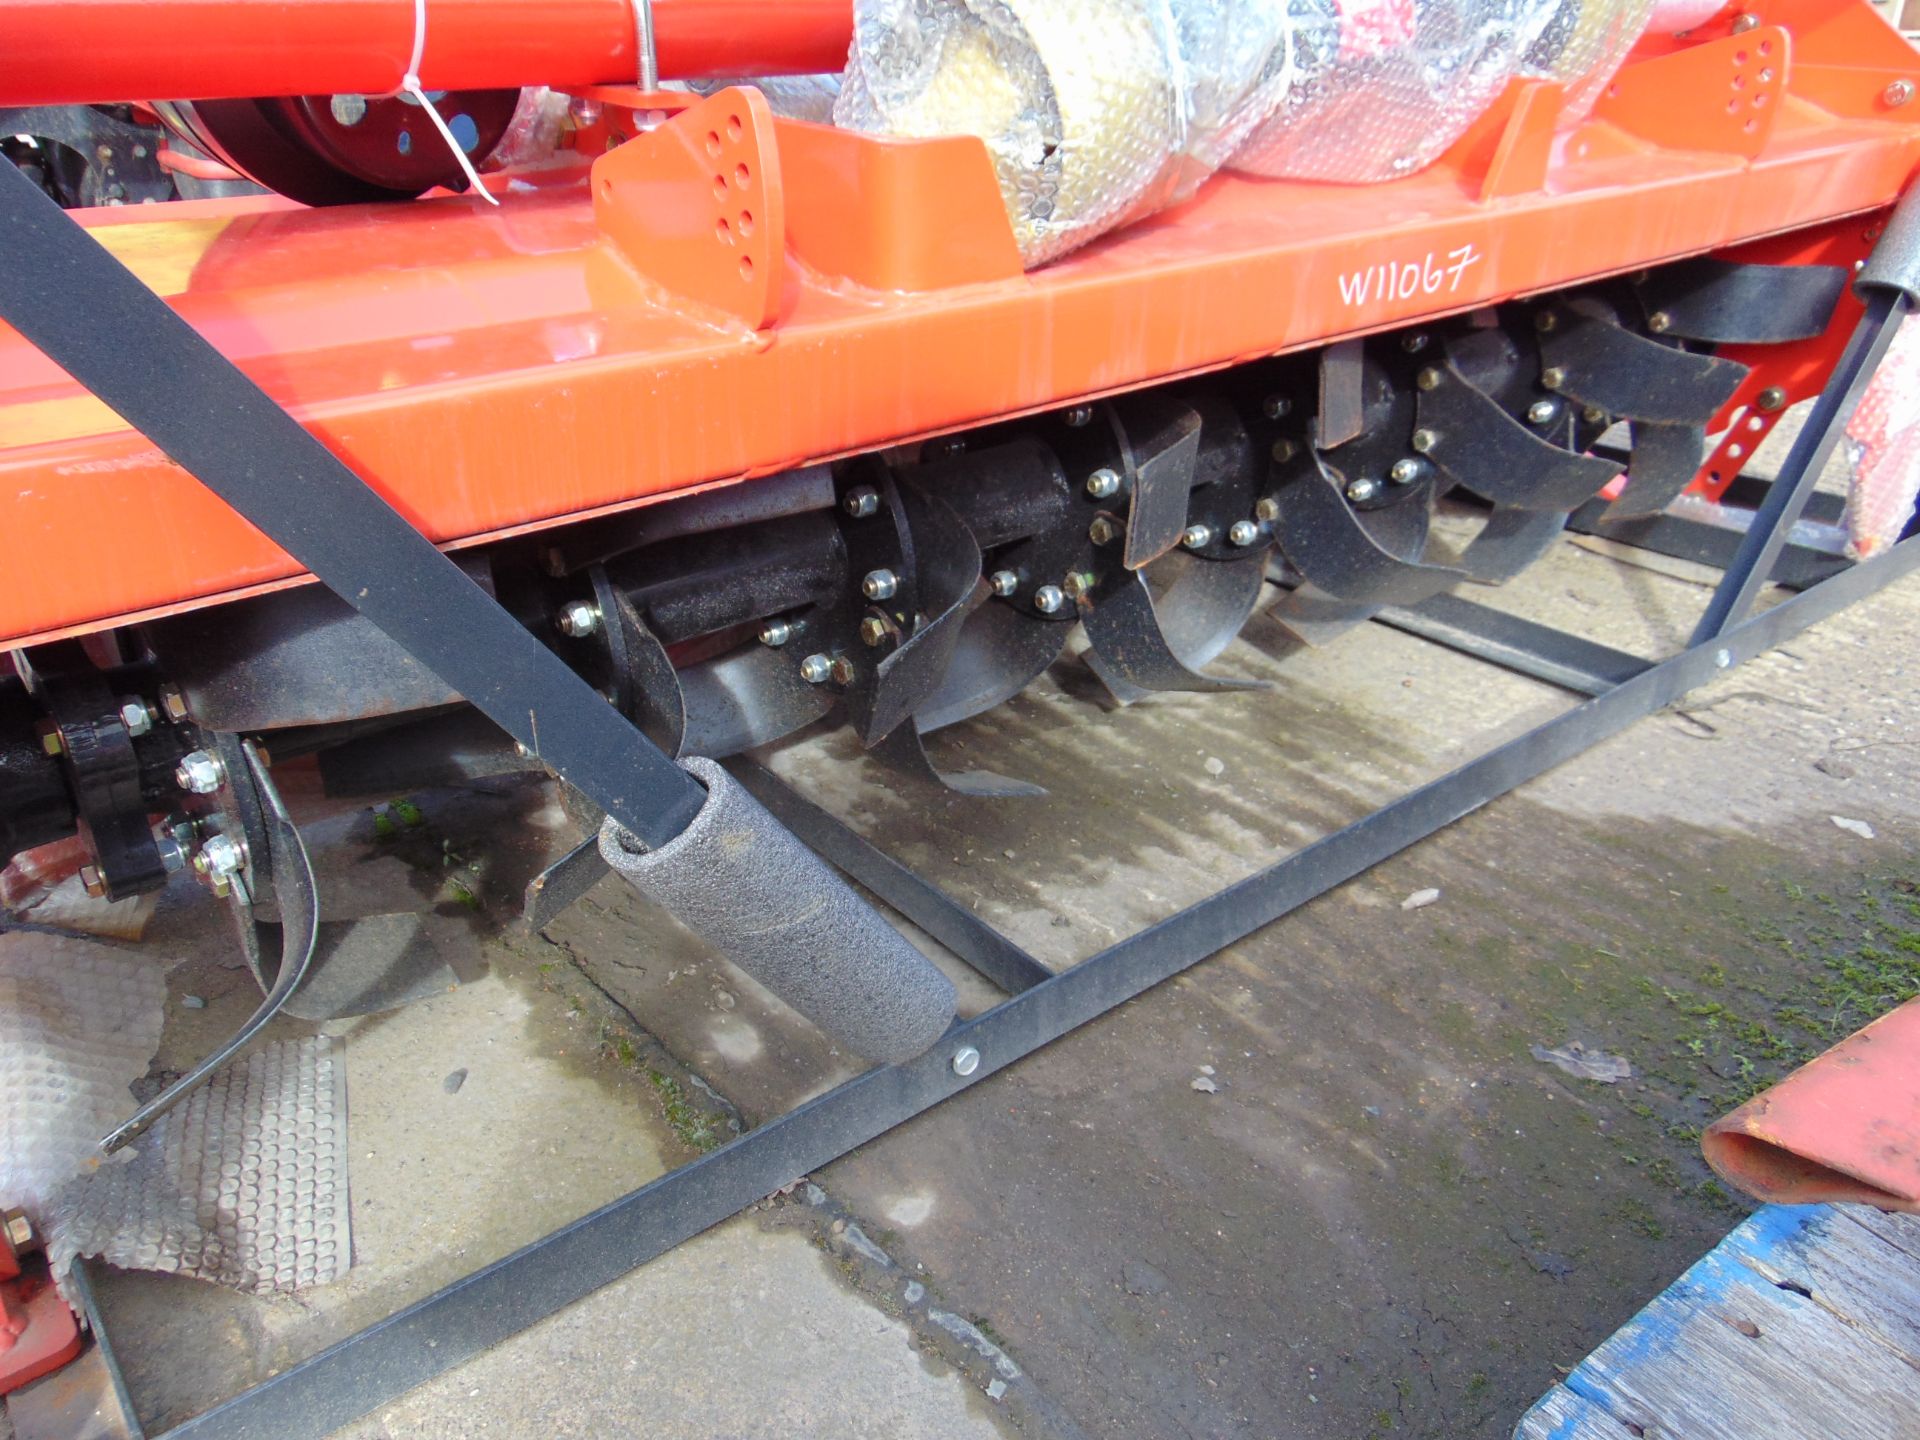 ** BRAND NEW ** TMG-RT175 Rotary Tiller 3 Point Hitch Mount Gear-Driven 70'' Working Width - Image 5 of 6